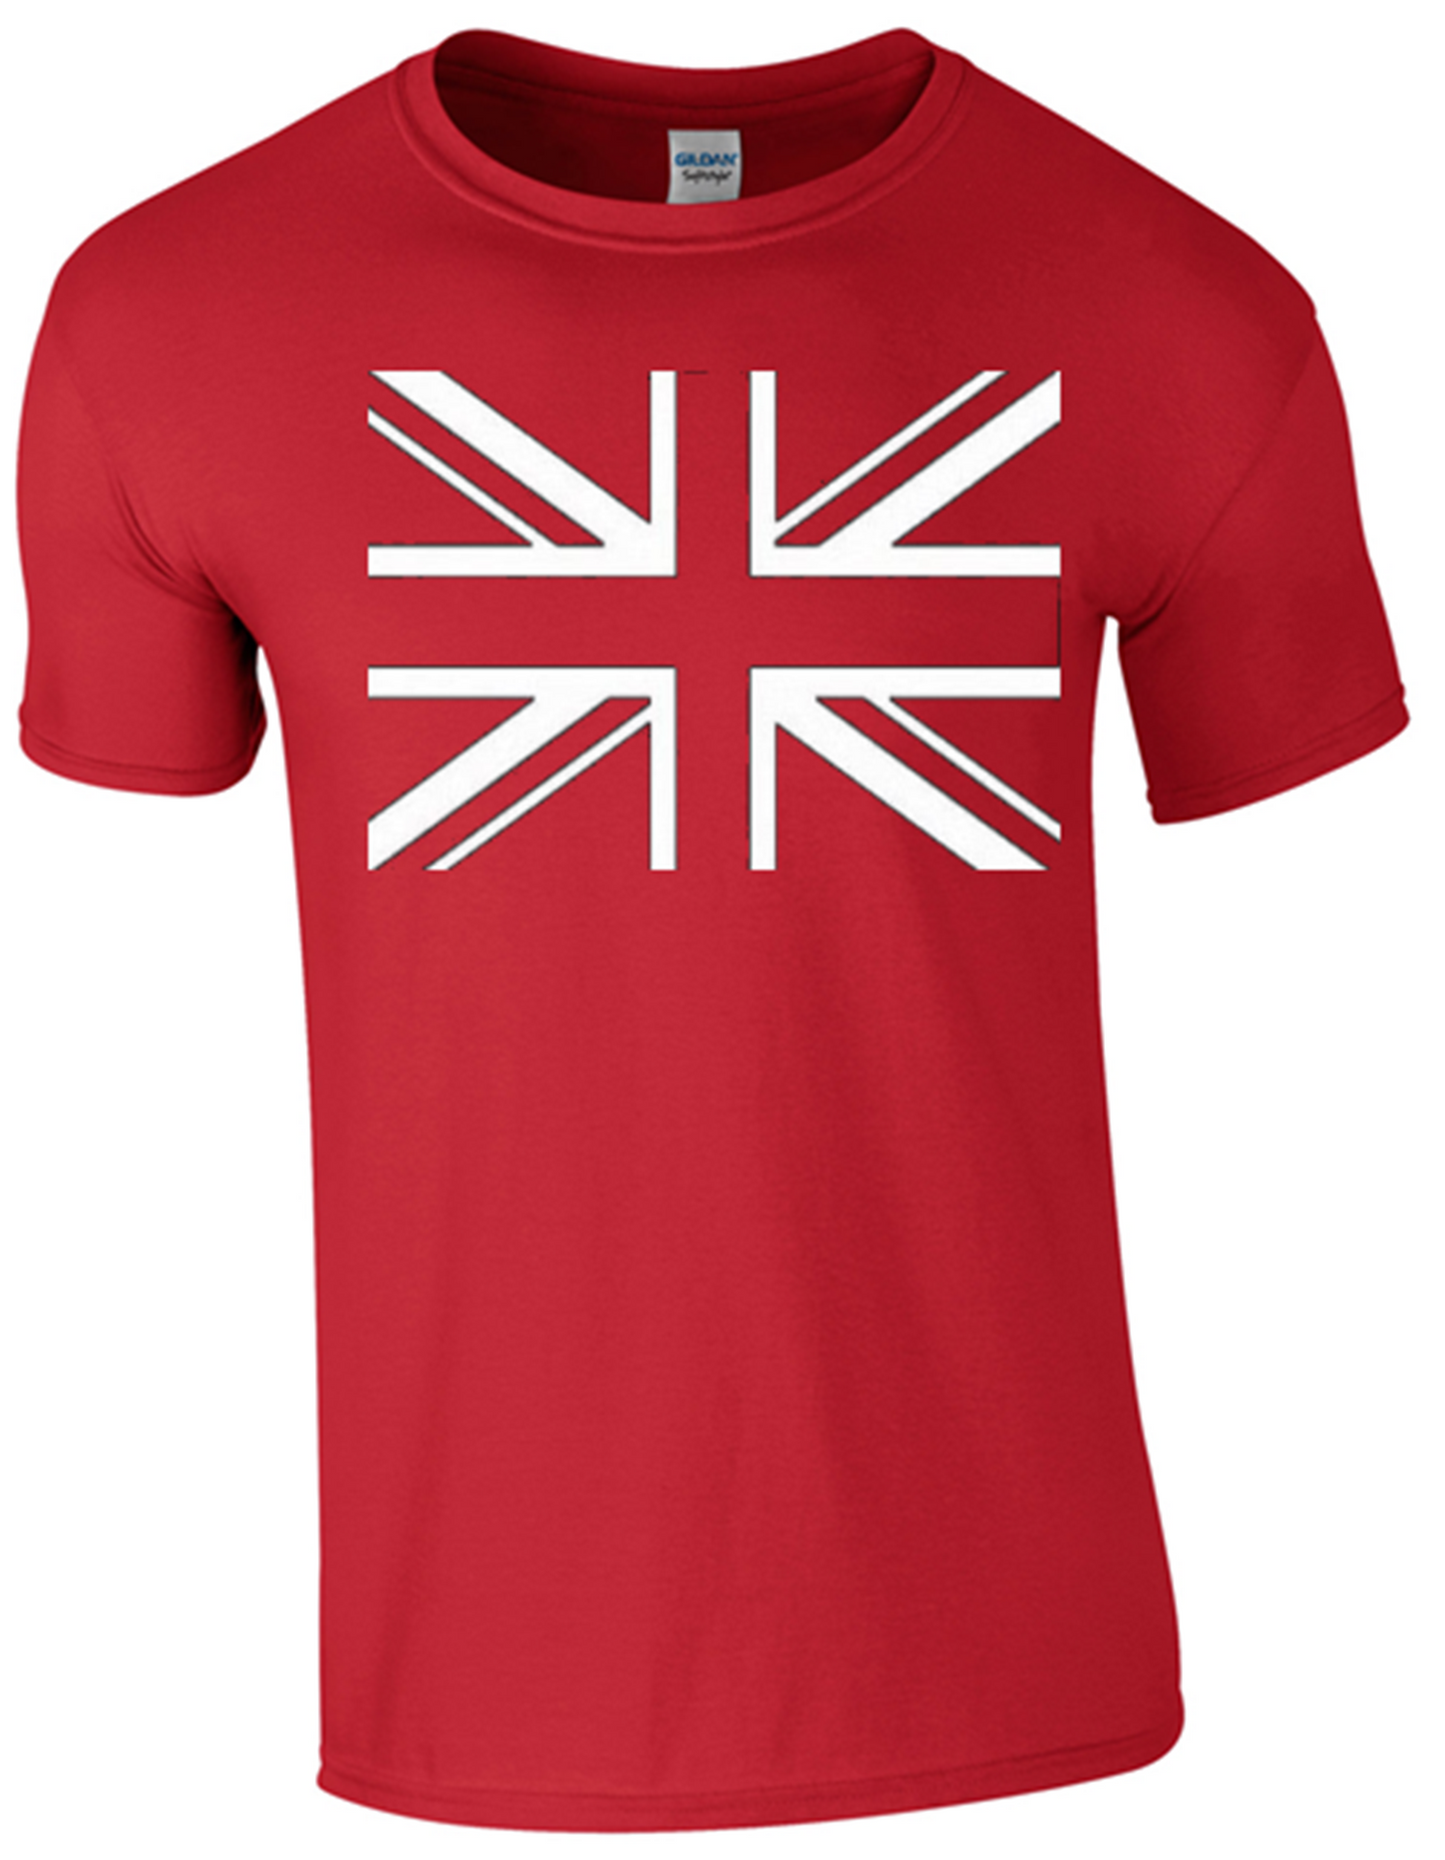 Union Jack T-Shirt Printed - Army 1157 kit S / Red Army 1157 Kit Veterans Owned Business